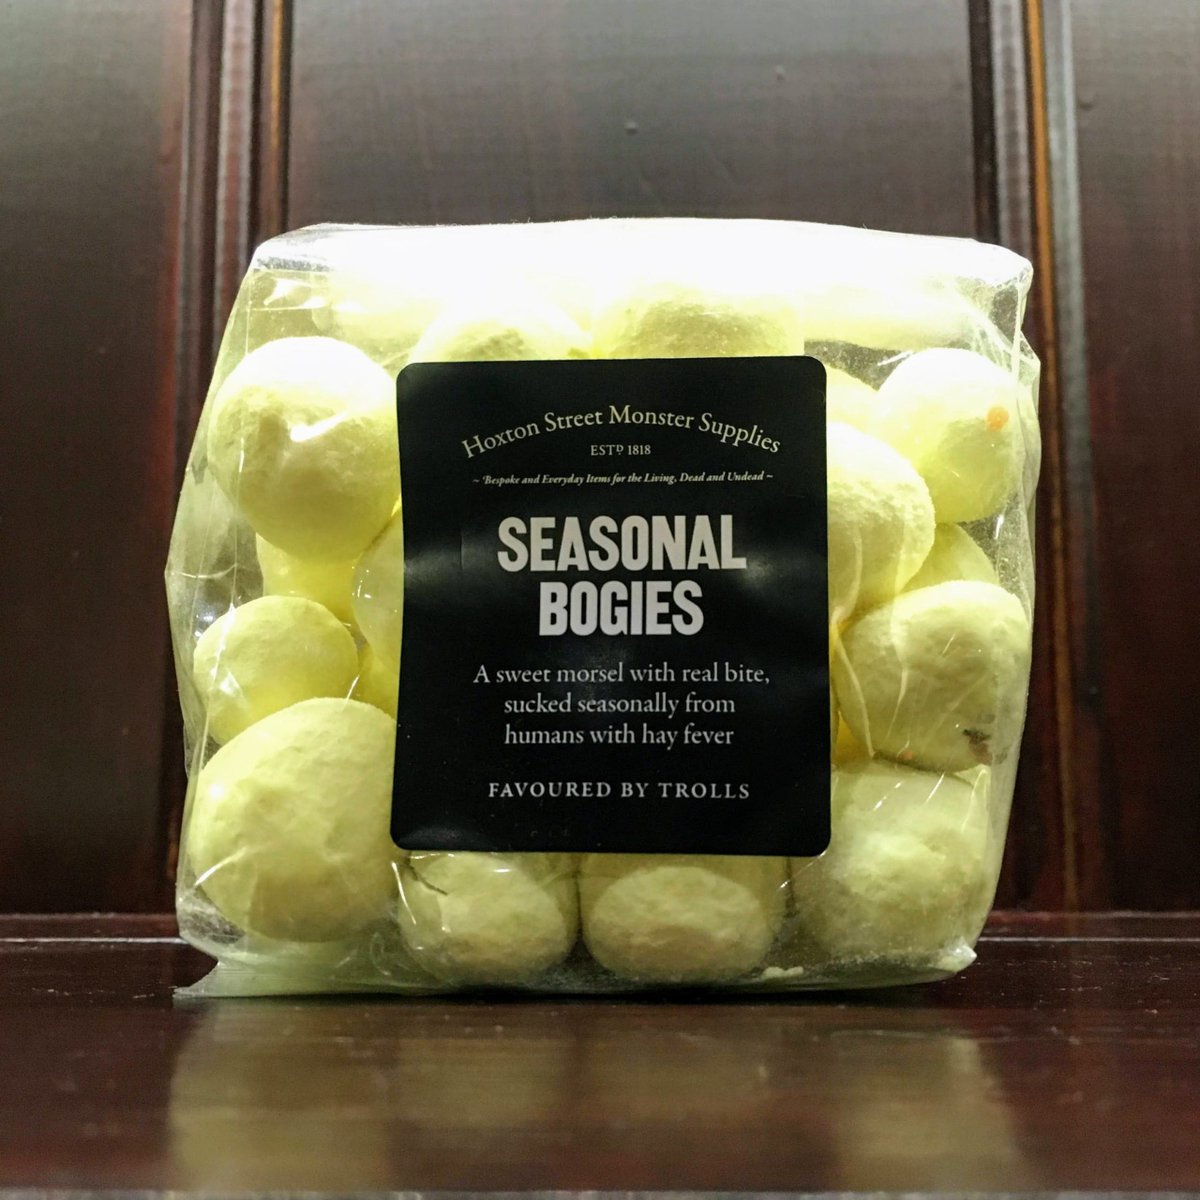 Achoo! Have you seen these Seasonal Bogies from @MonsterSupplies? A sweet morsel, sucked seasonally from humans with hayfever. (NOTES FOR HUMANS: resembles a lemon-flavoured bonbon with a toffee centre and a dusting of icing sugar!) Available now: 👉 buff.ly/49zW1B1